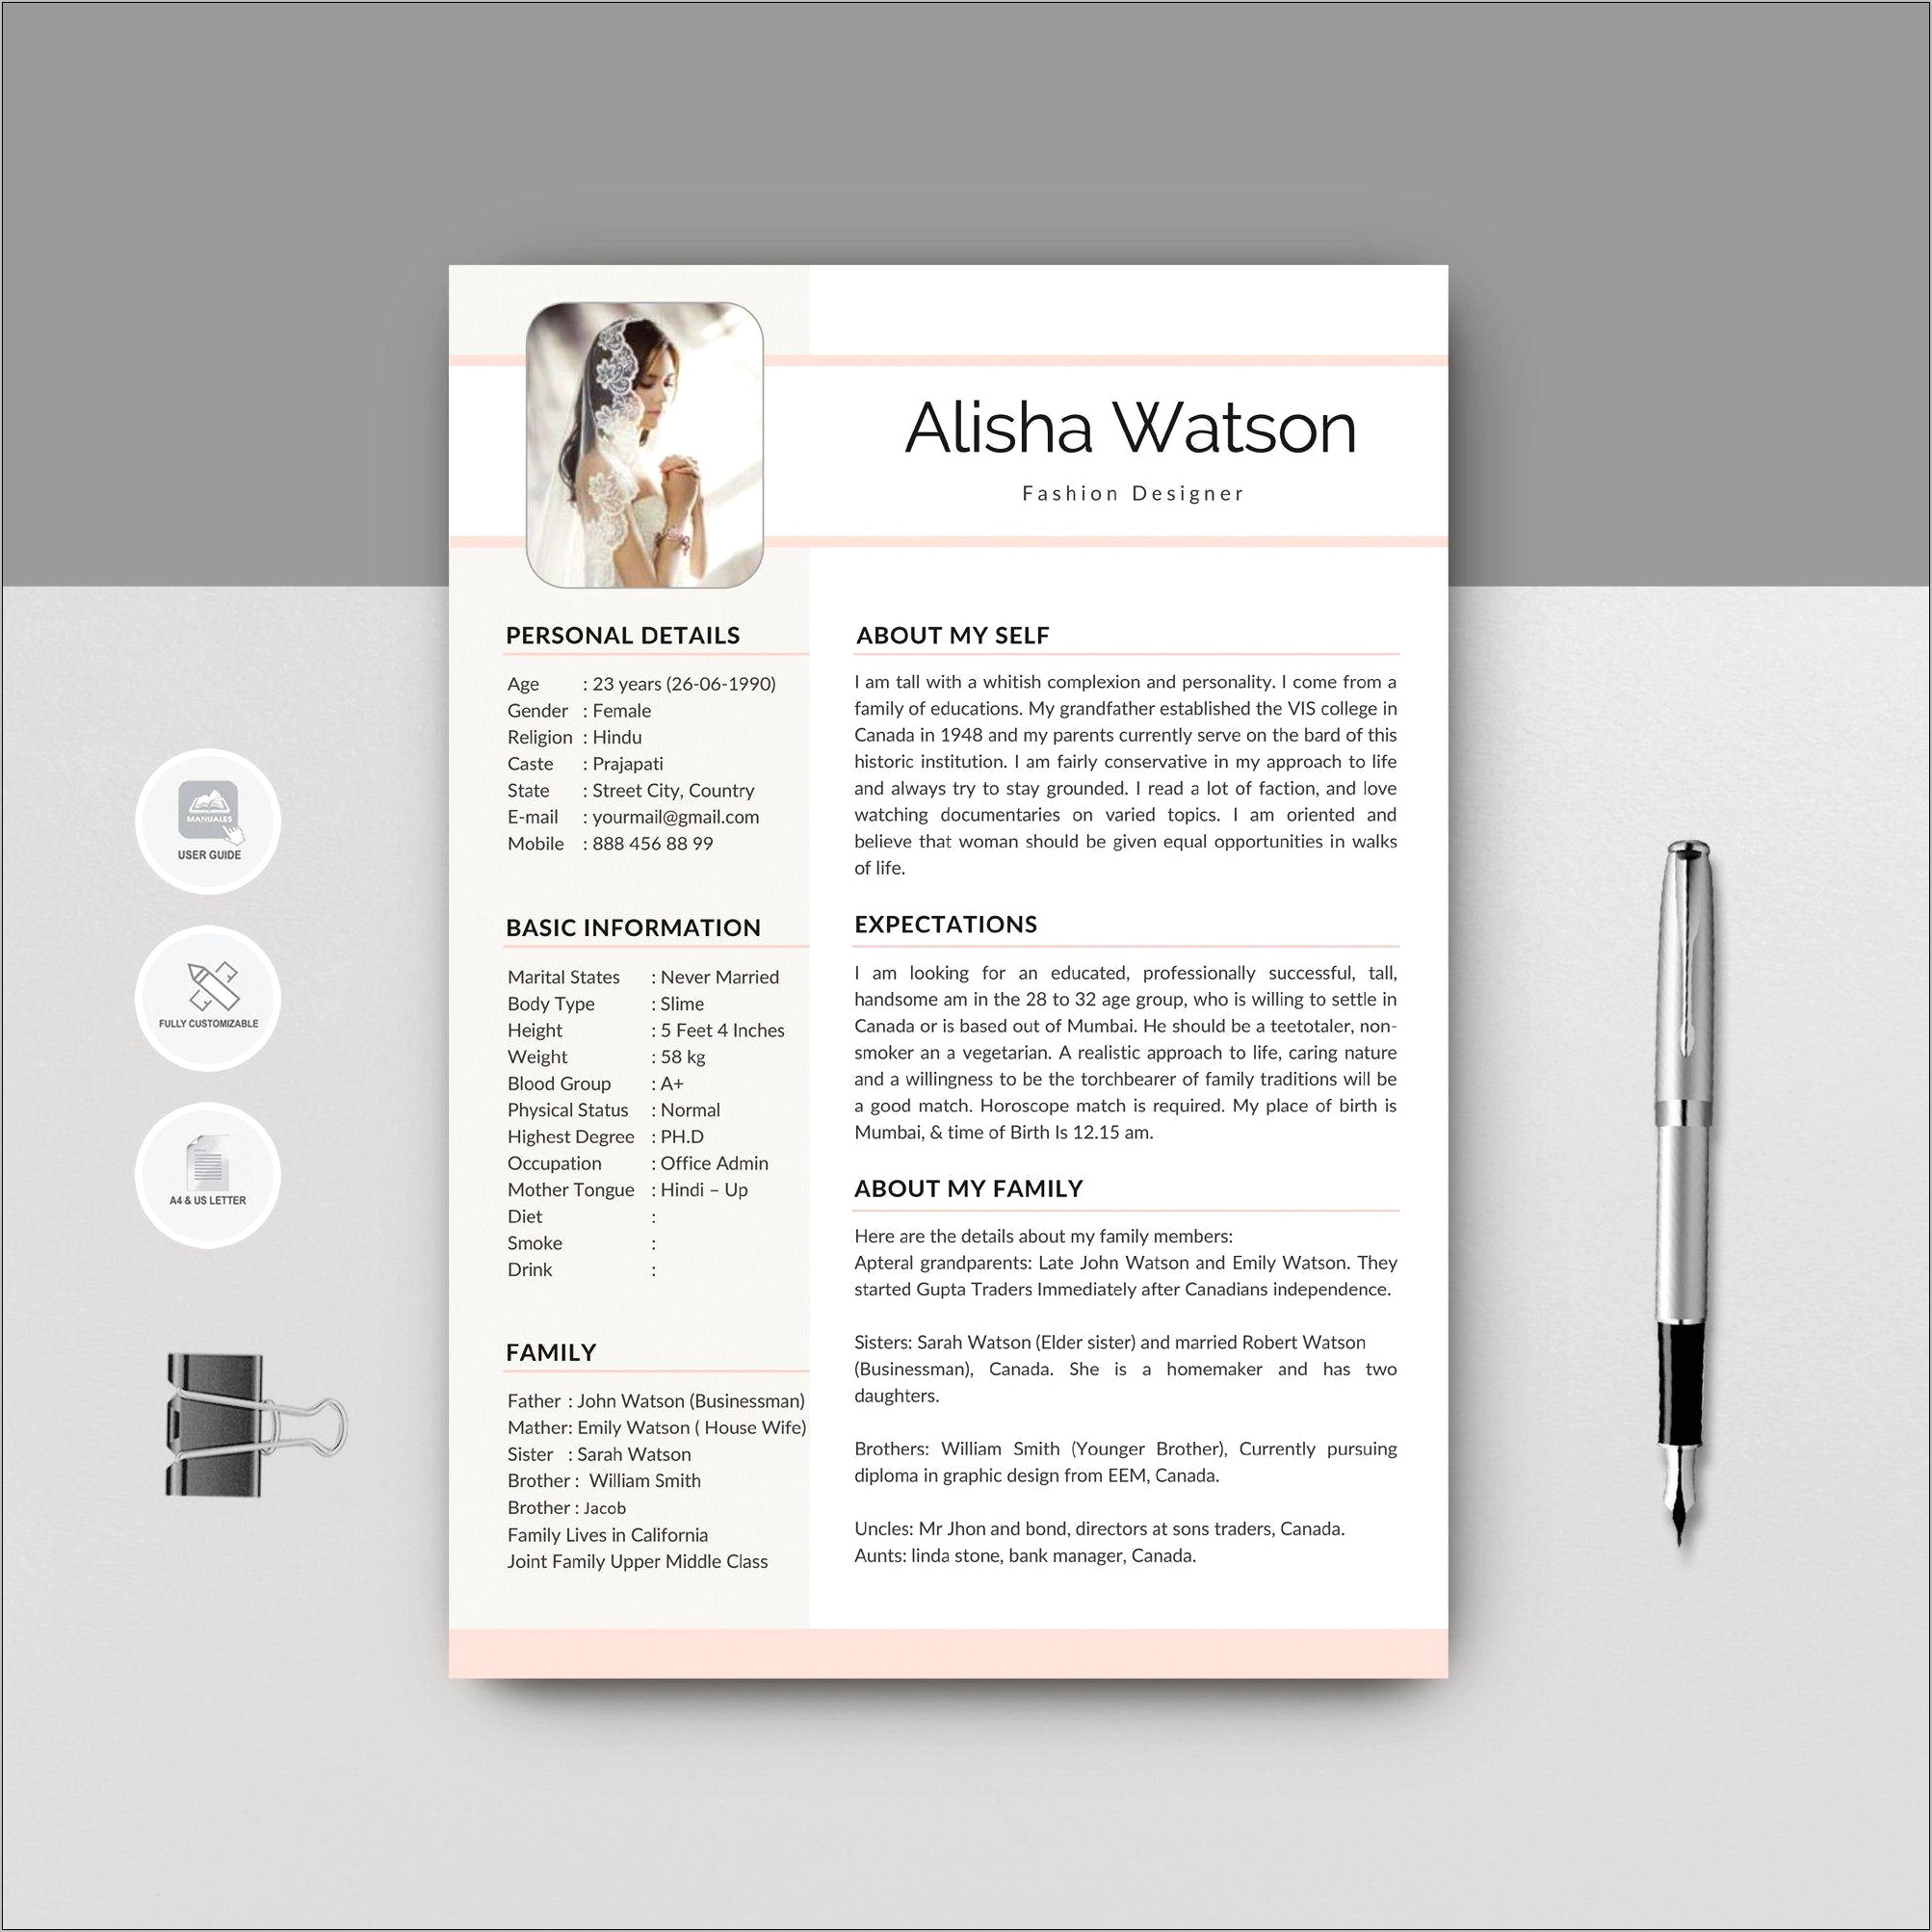 Resume Sample Profile For Marriage